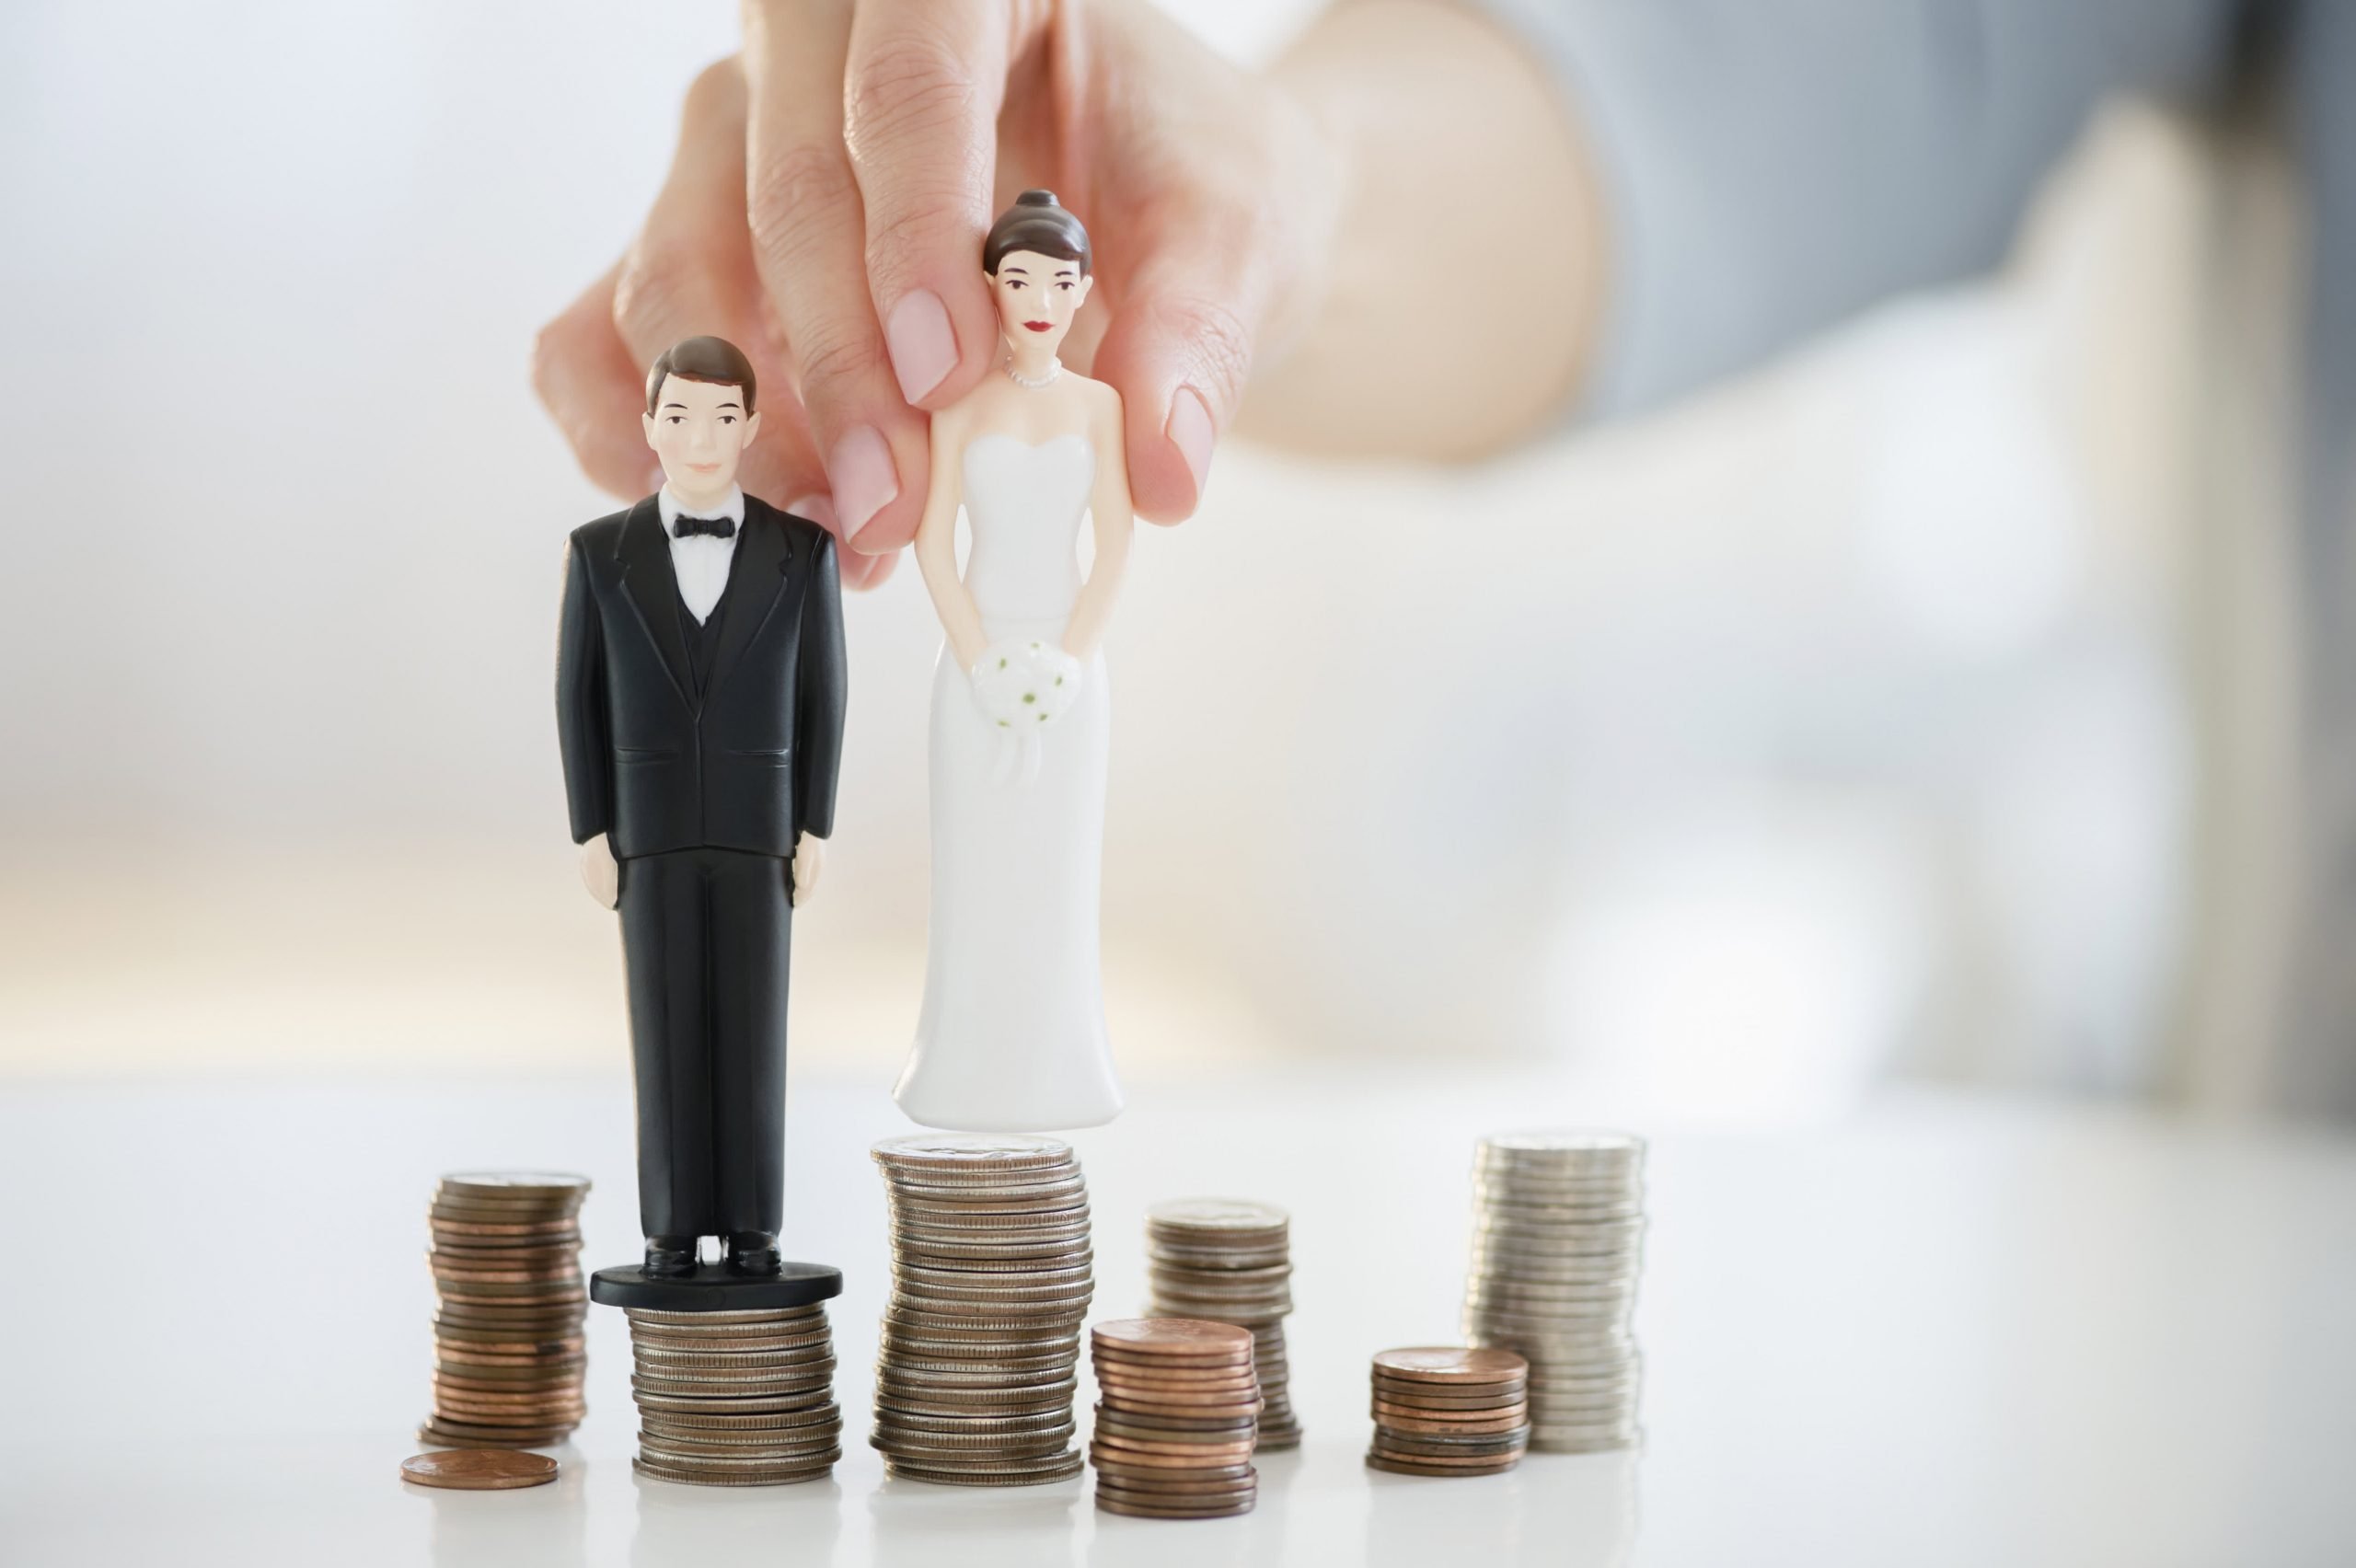 Financial advisors can give newlyweds financial ...